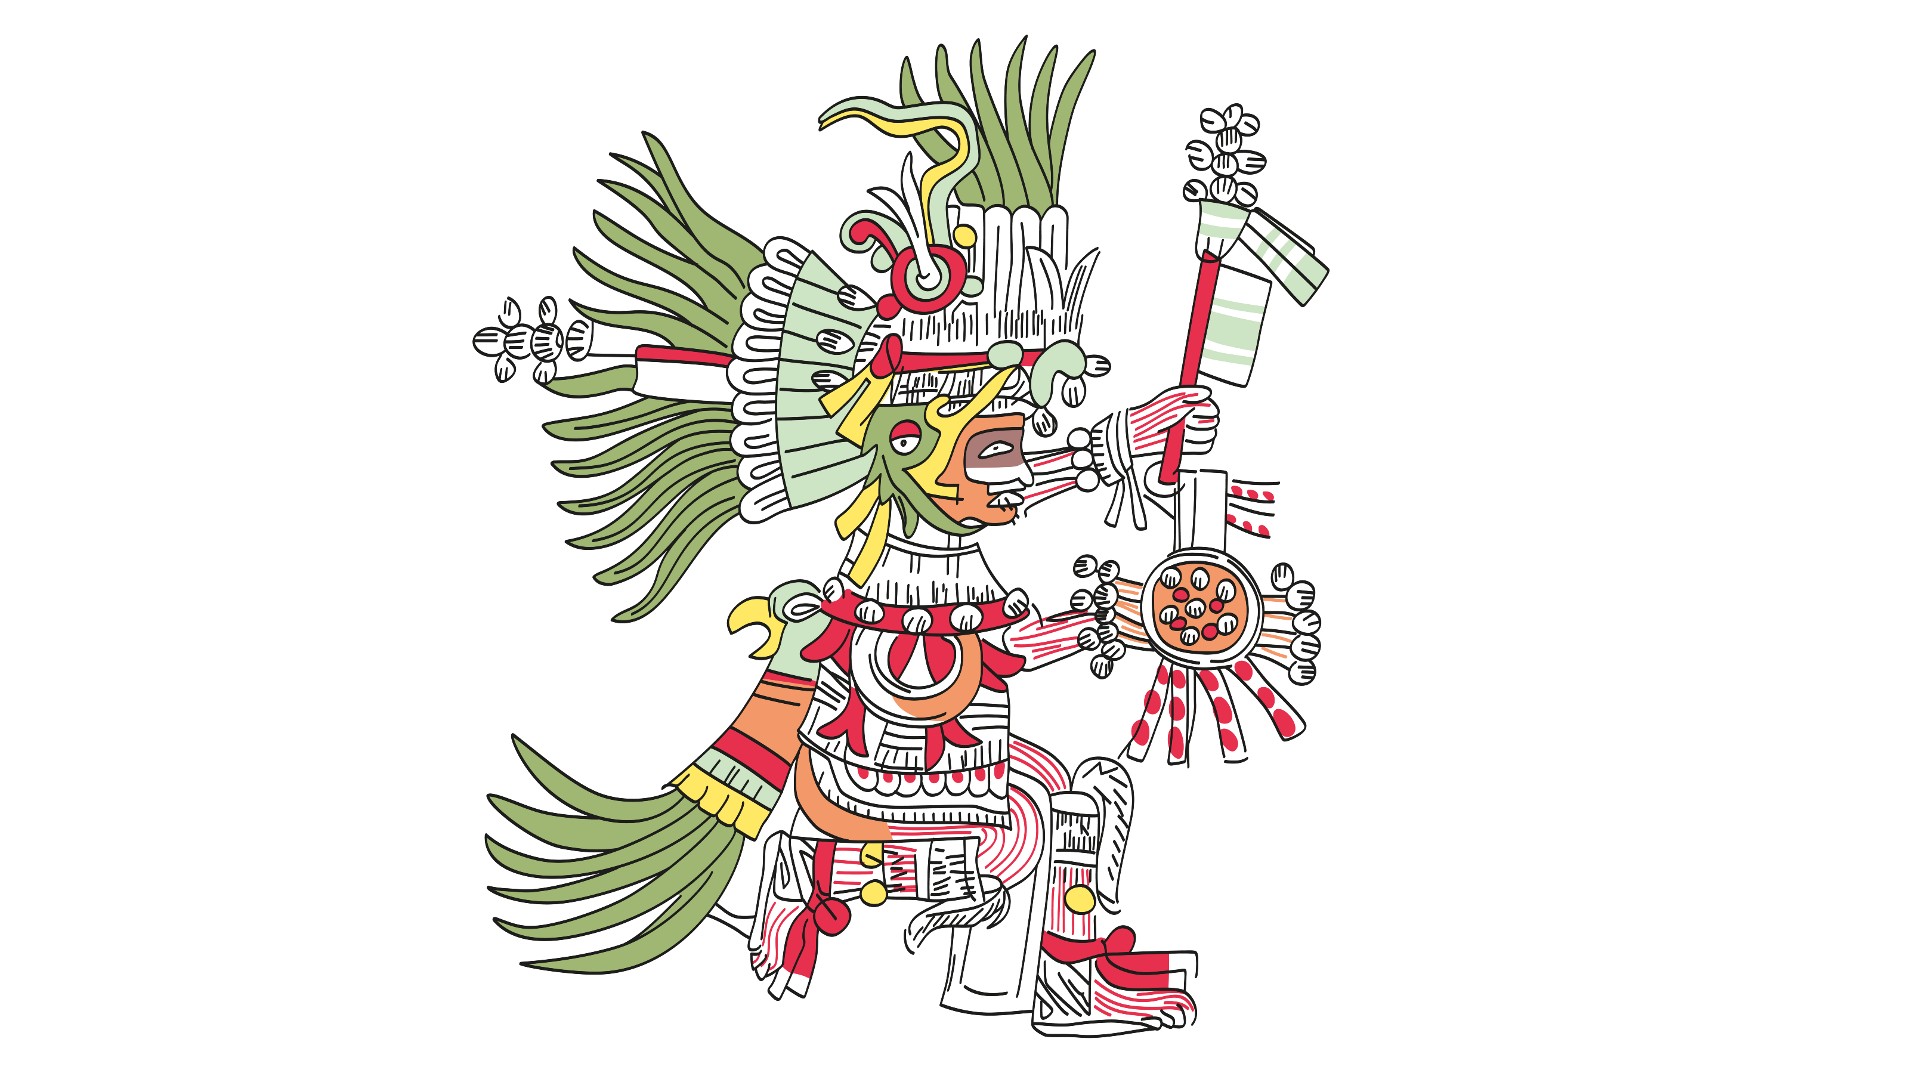 A drawing of the Aztec god Huitzilopochtli. He is depicted mid dance, one foot up, one foot down (bells around both ankles) and both hands out in front – one hand holding a staff and the other a decorated shield. He is wearing an elaborate headdress made out of long, green strands. He also has a cloak that looks like a bird’s head and with long green feathers.